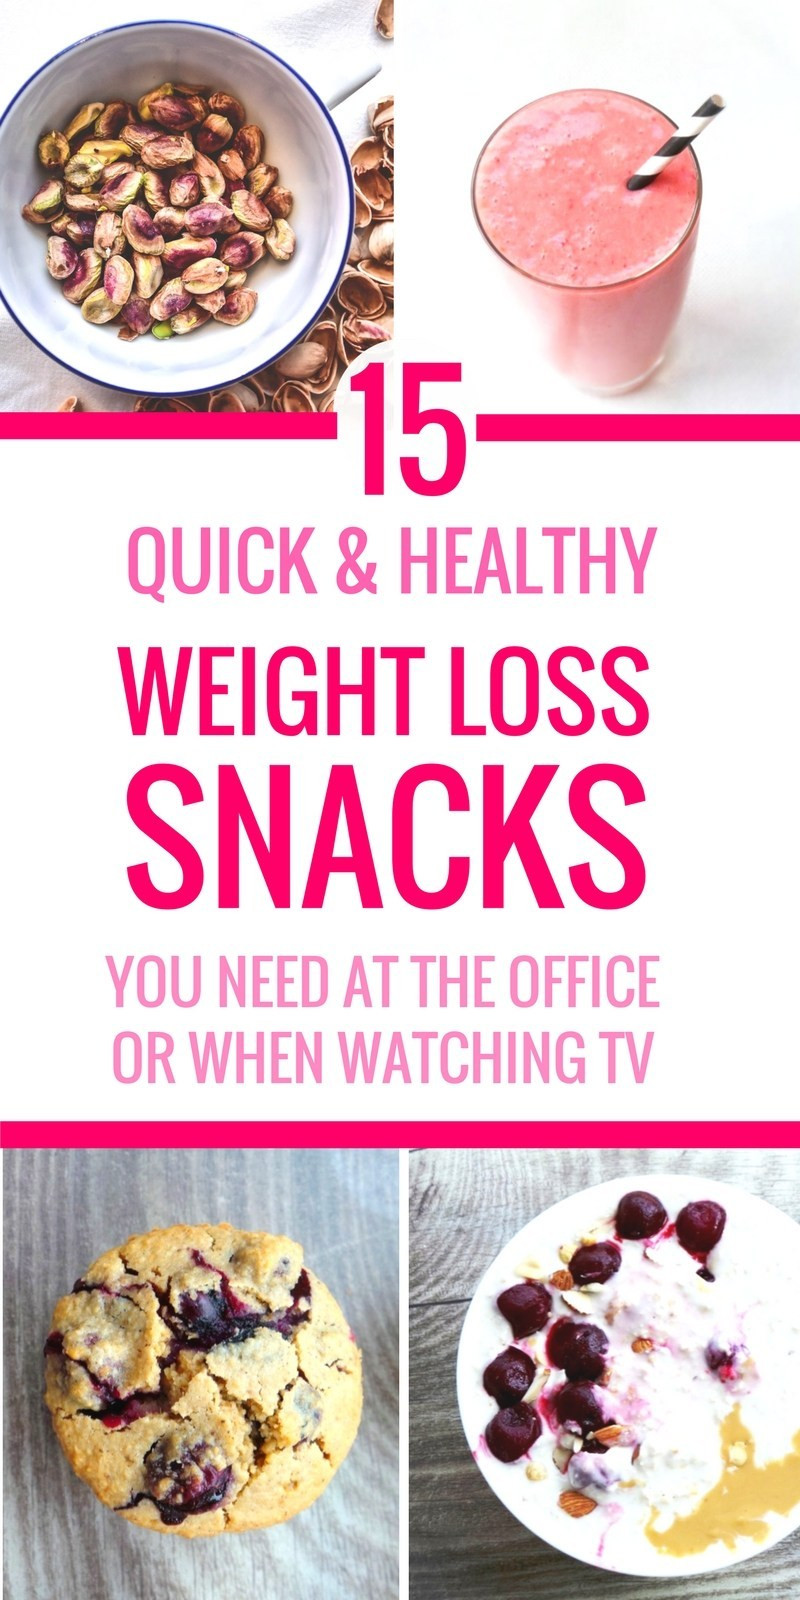 Healthy Quick Snacks
 Easy Healthy Snacks The Go At Work or Watching TV